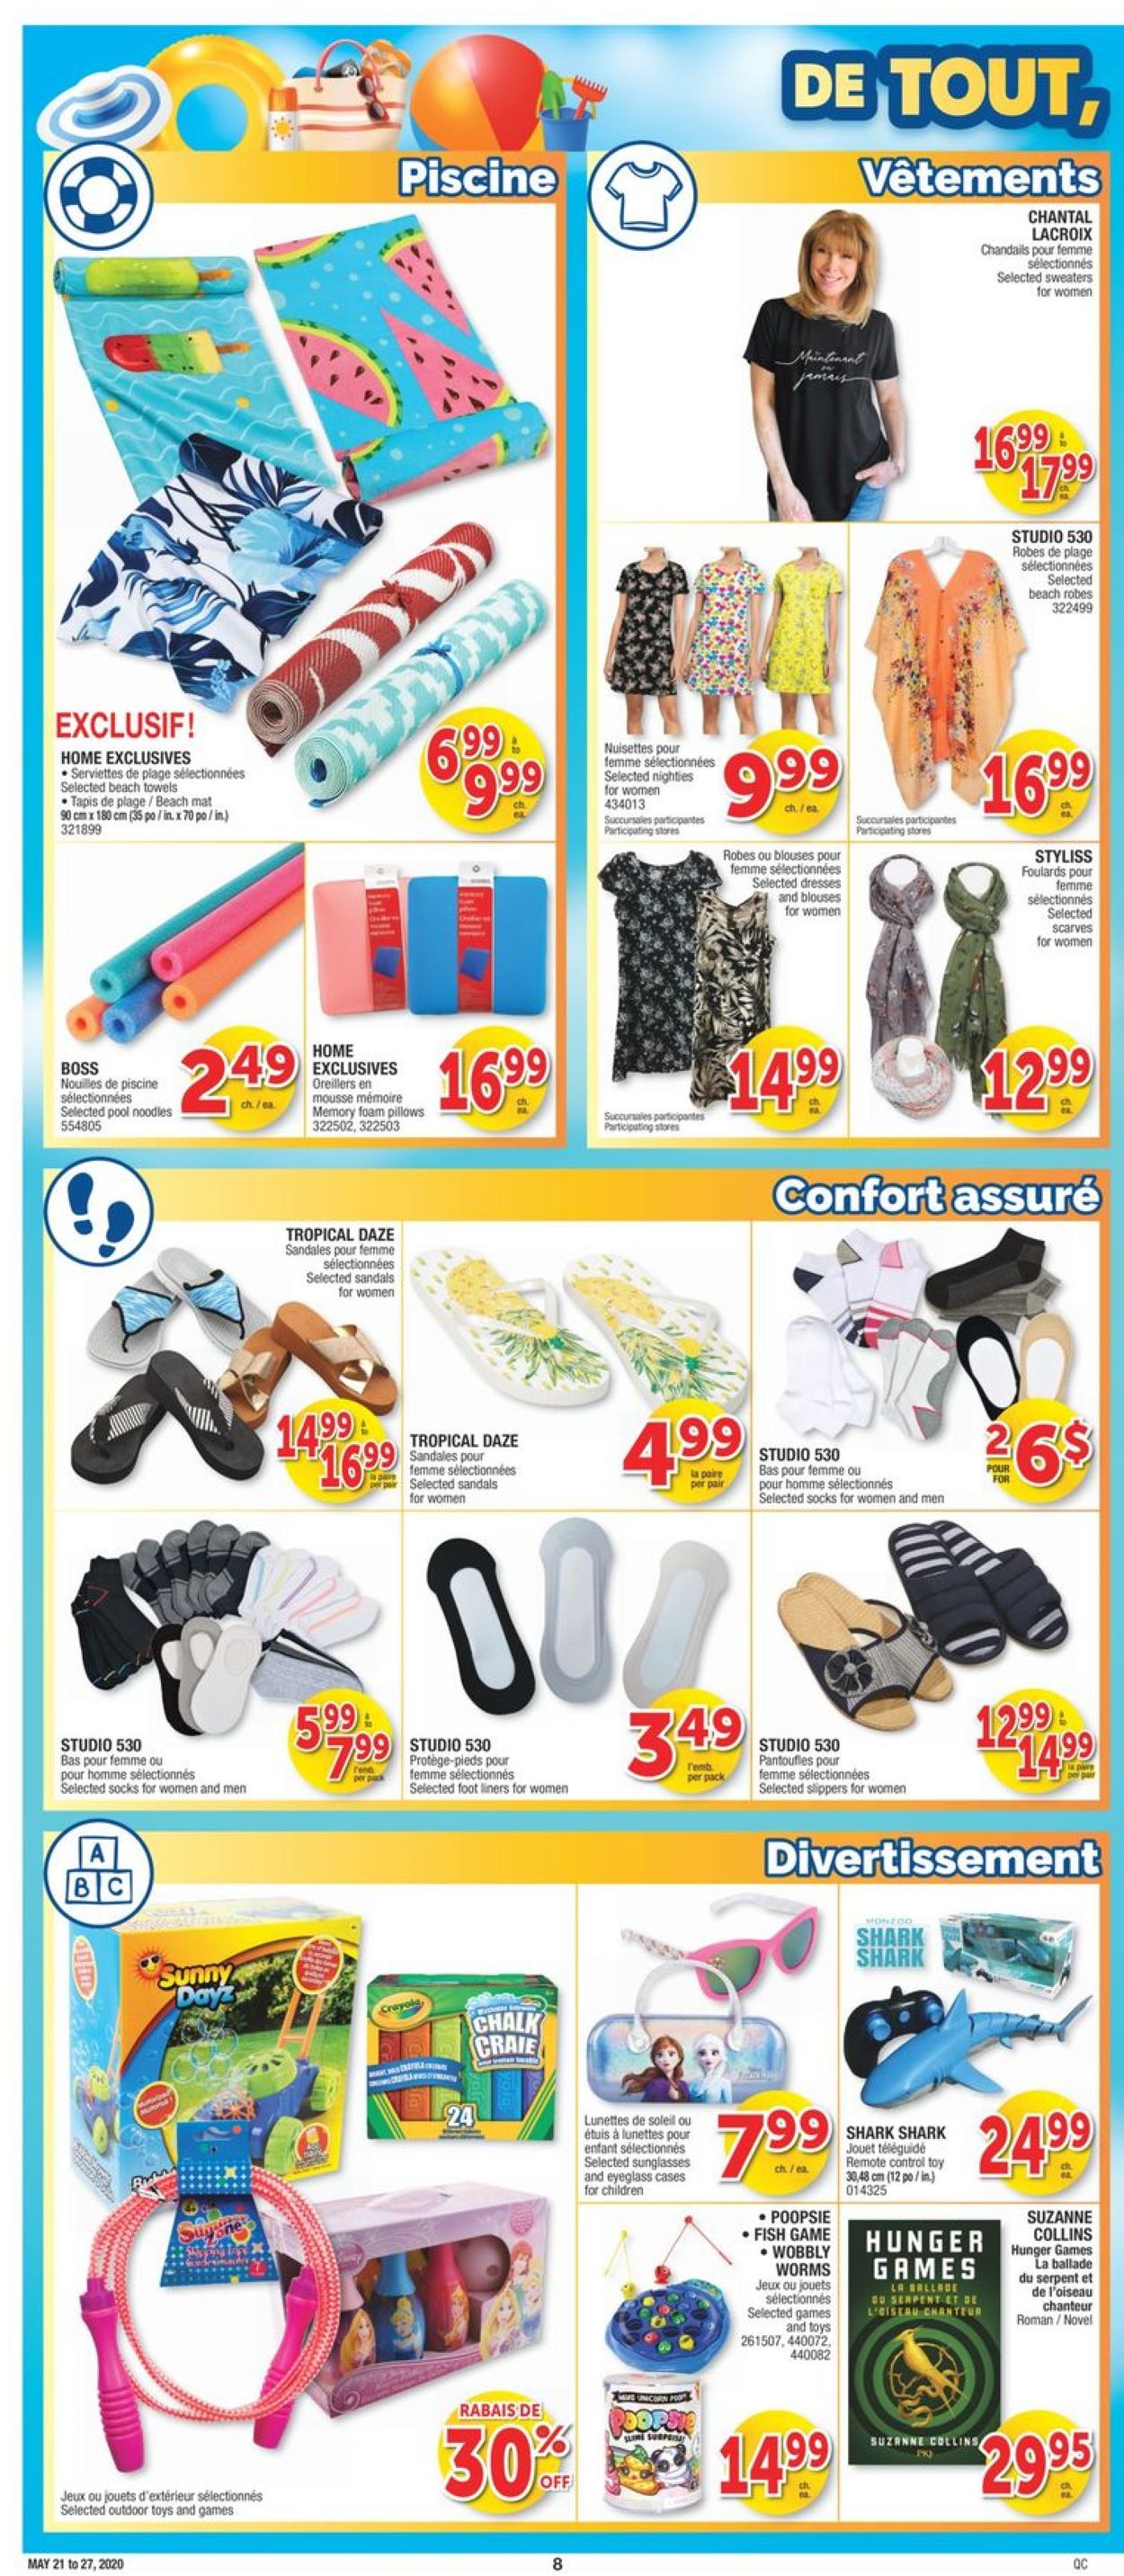 Jean Coutu Flyer - 05/21-05/27/2020 (Page 8)